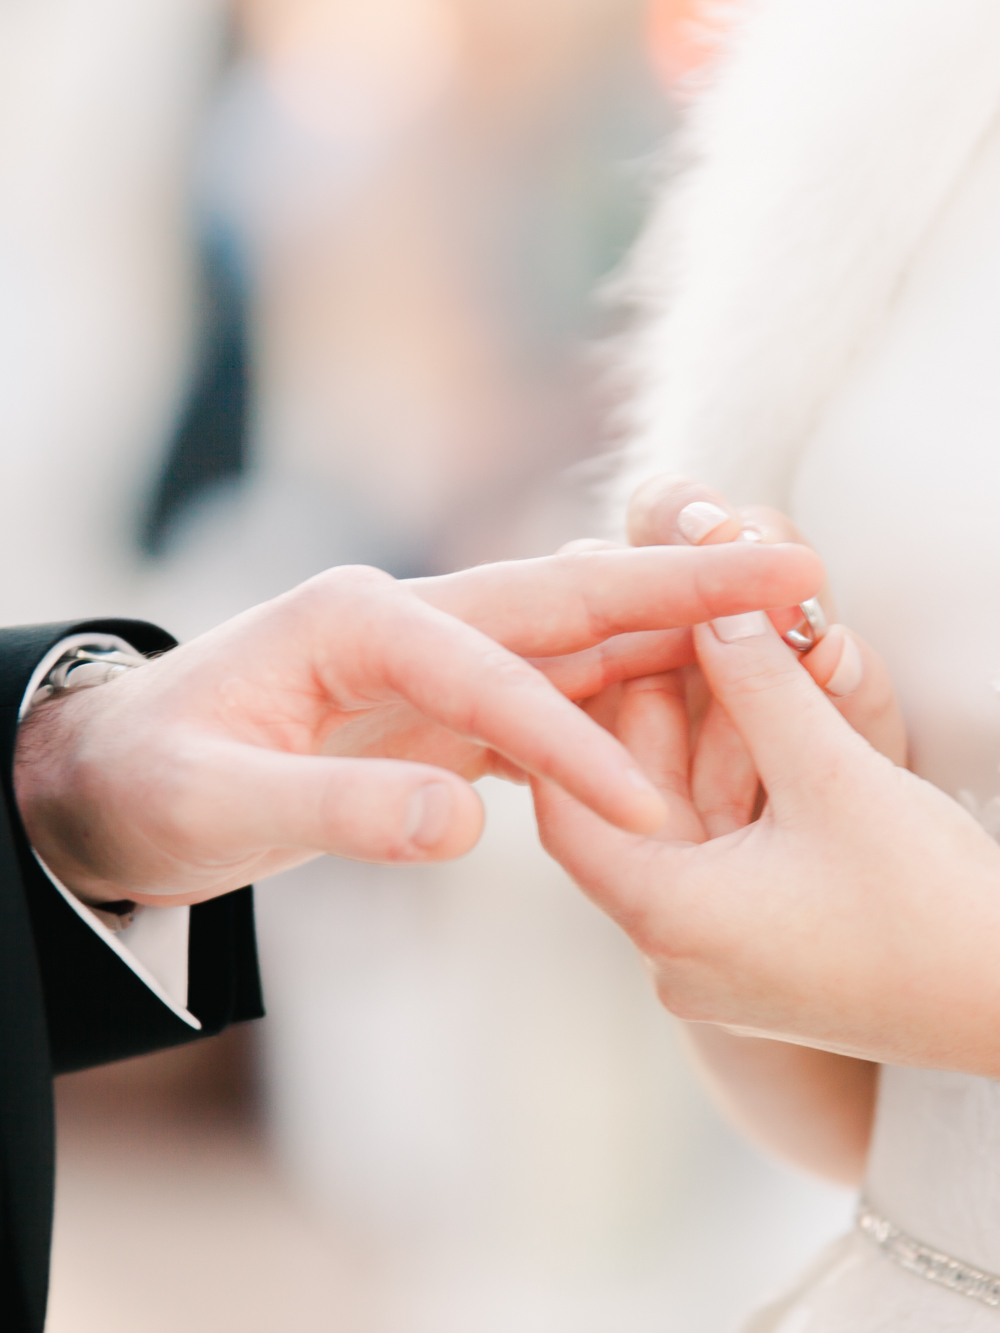 The bride places wedding band on grooms finger